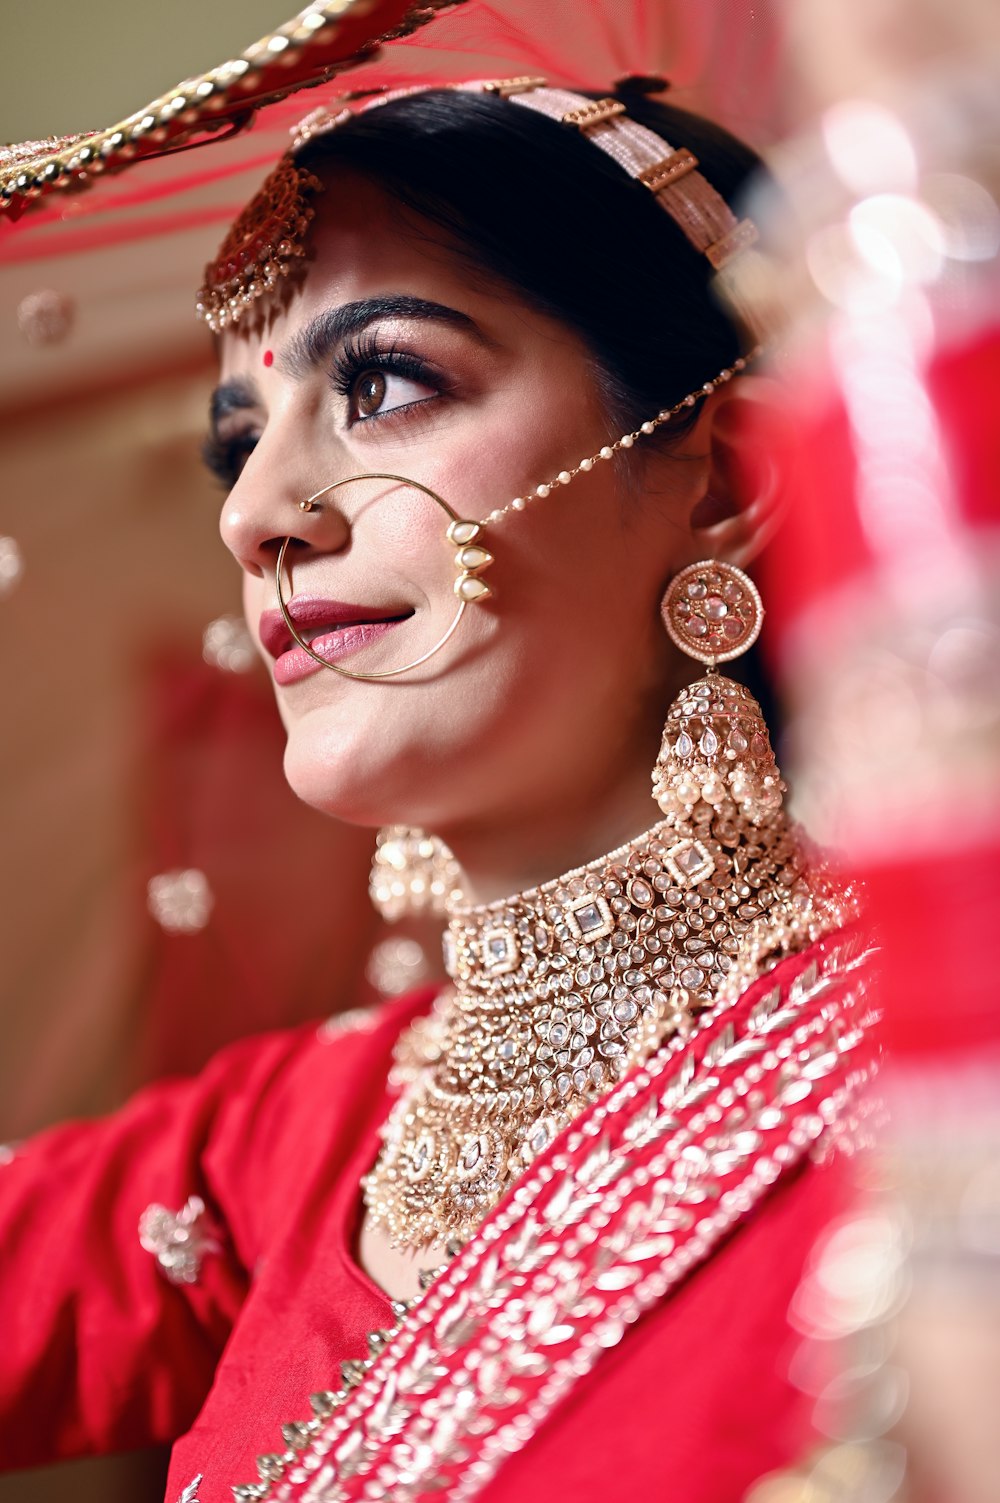 a woman wearing a red outfit and jewelry